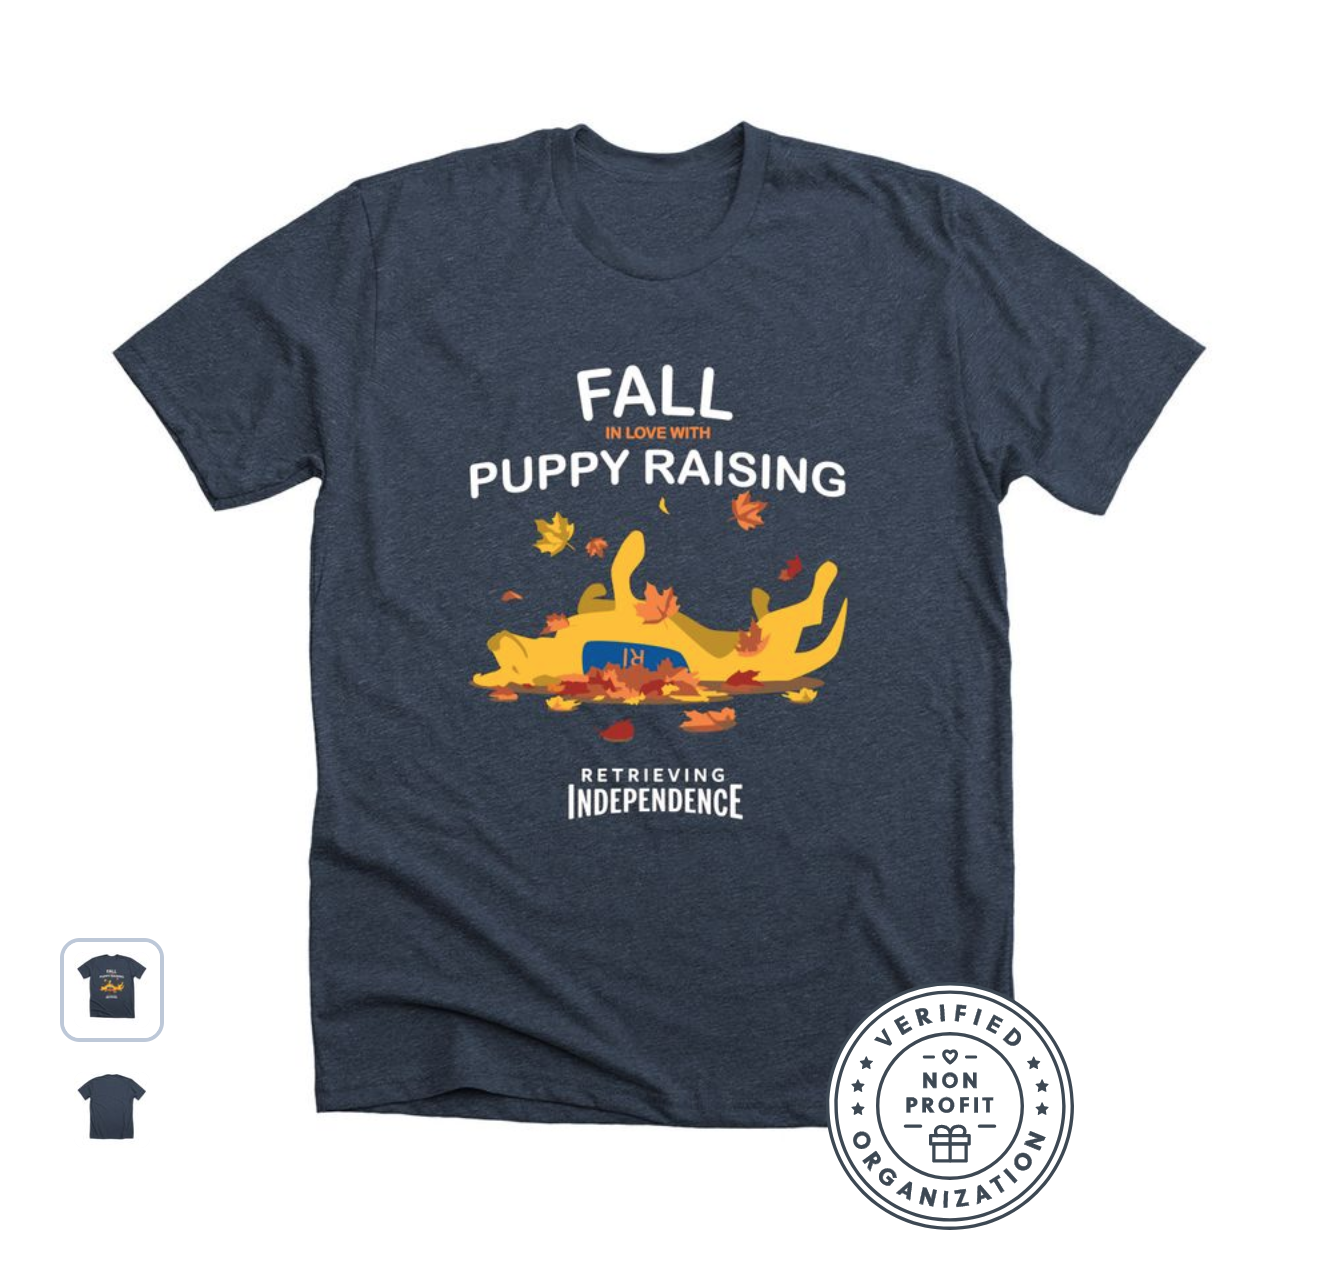 Fall in Love with Puppy Raising T-shirt in Navy